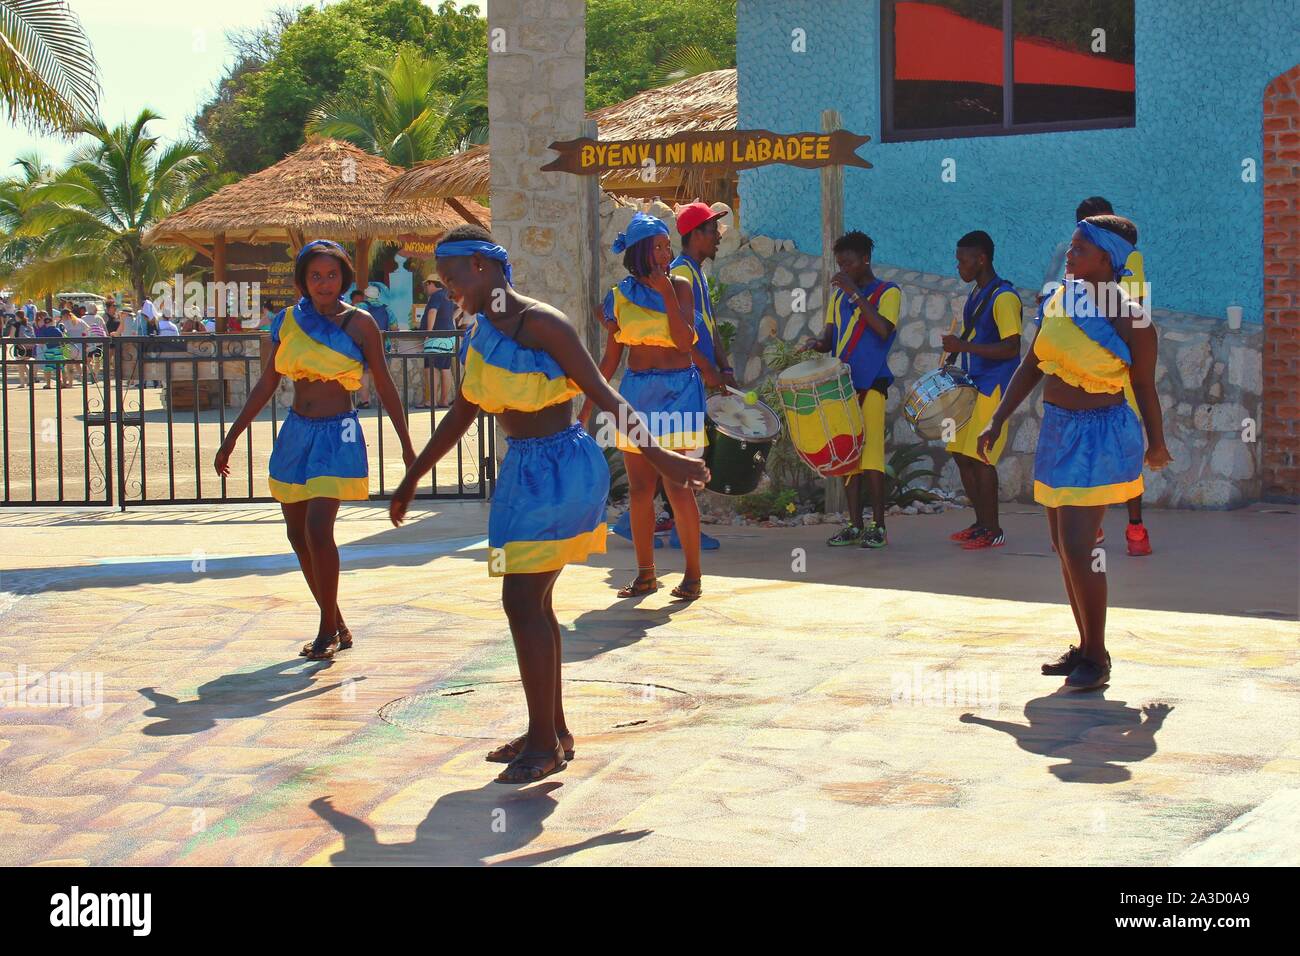 A group of traditional young dancers and drummers, performing outside the entrance to the private resort of Labadee, owned by Royal Caribbean cruises. Stock Photo